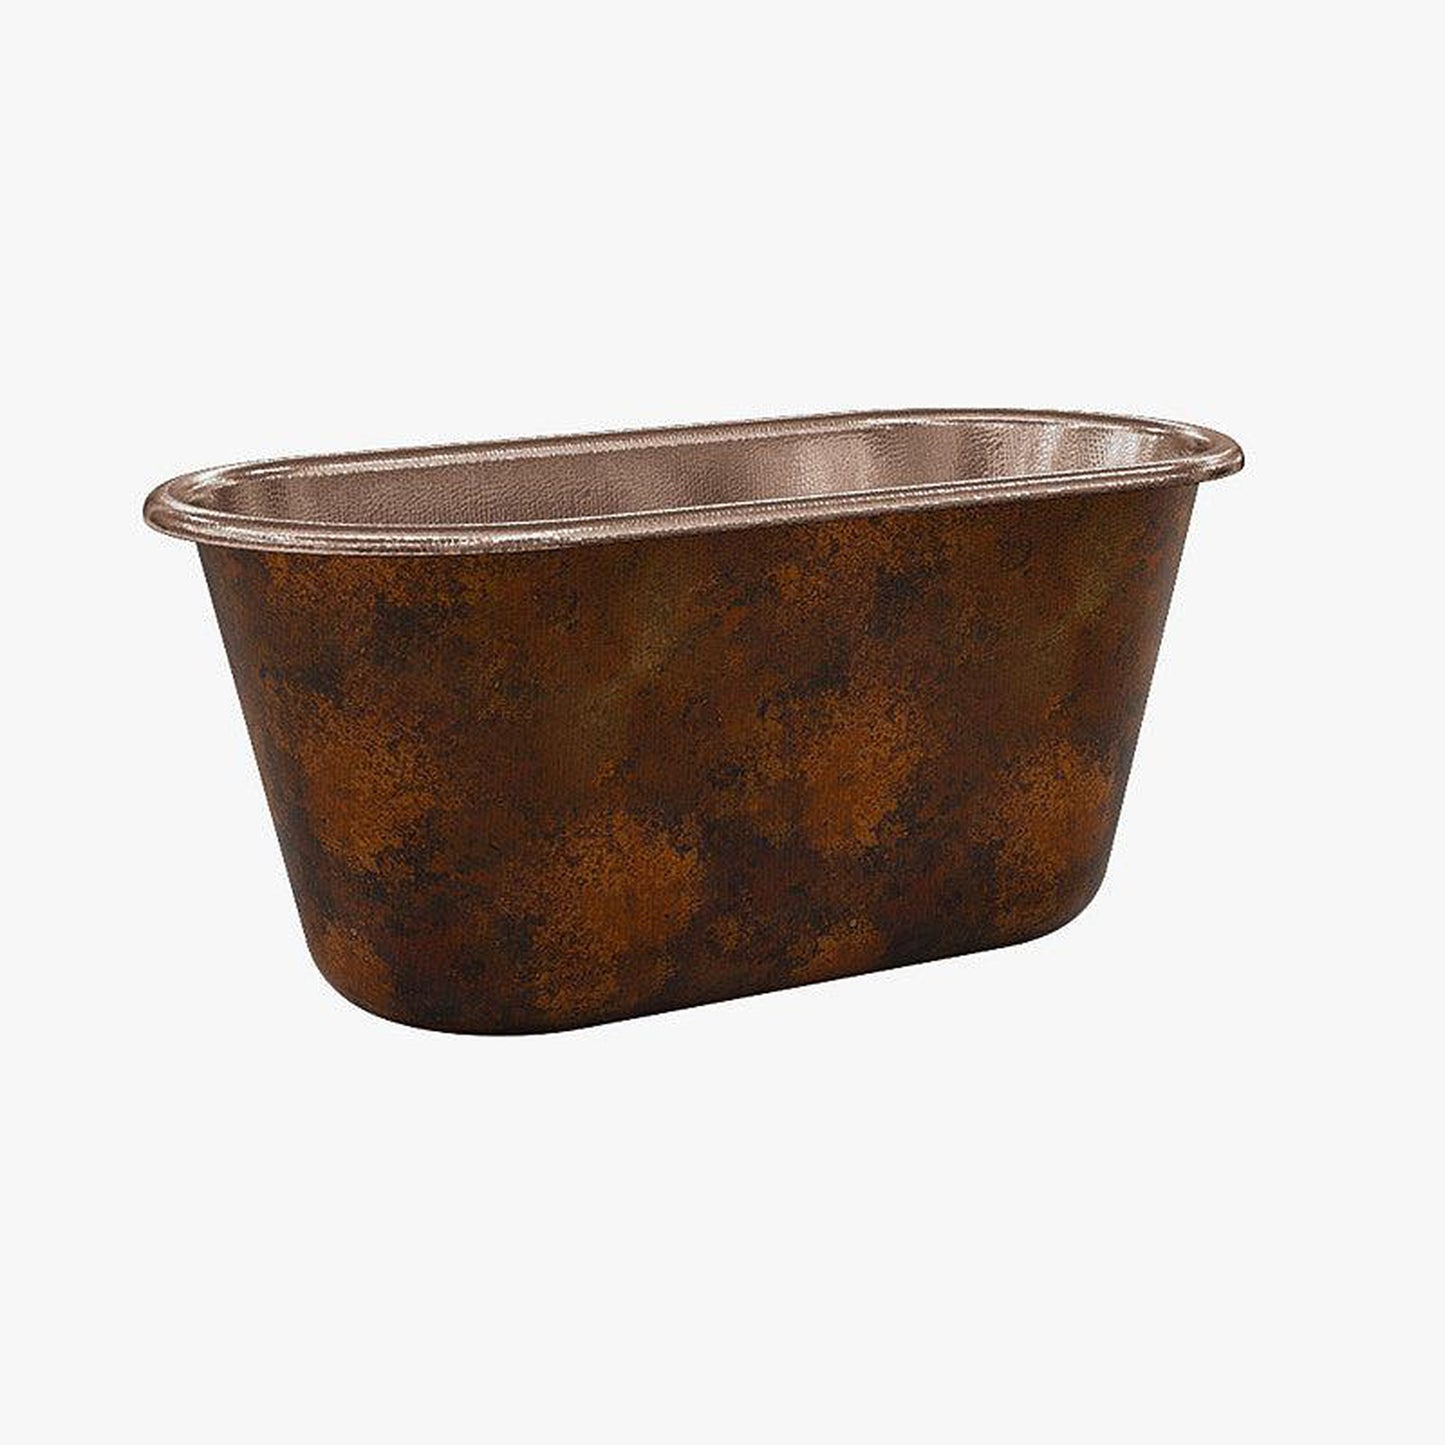 CopperSmith Heritage HX1 64" x 31" x 31" 14-Gauge Fire Copper Freestanding Bathtub With Polished Copper Interior and Polished Brass Push Button Tub Drain and Polished Chrome Tub Filler